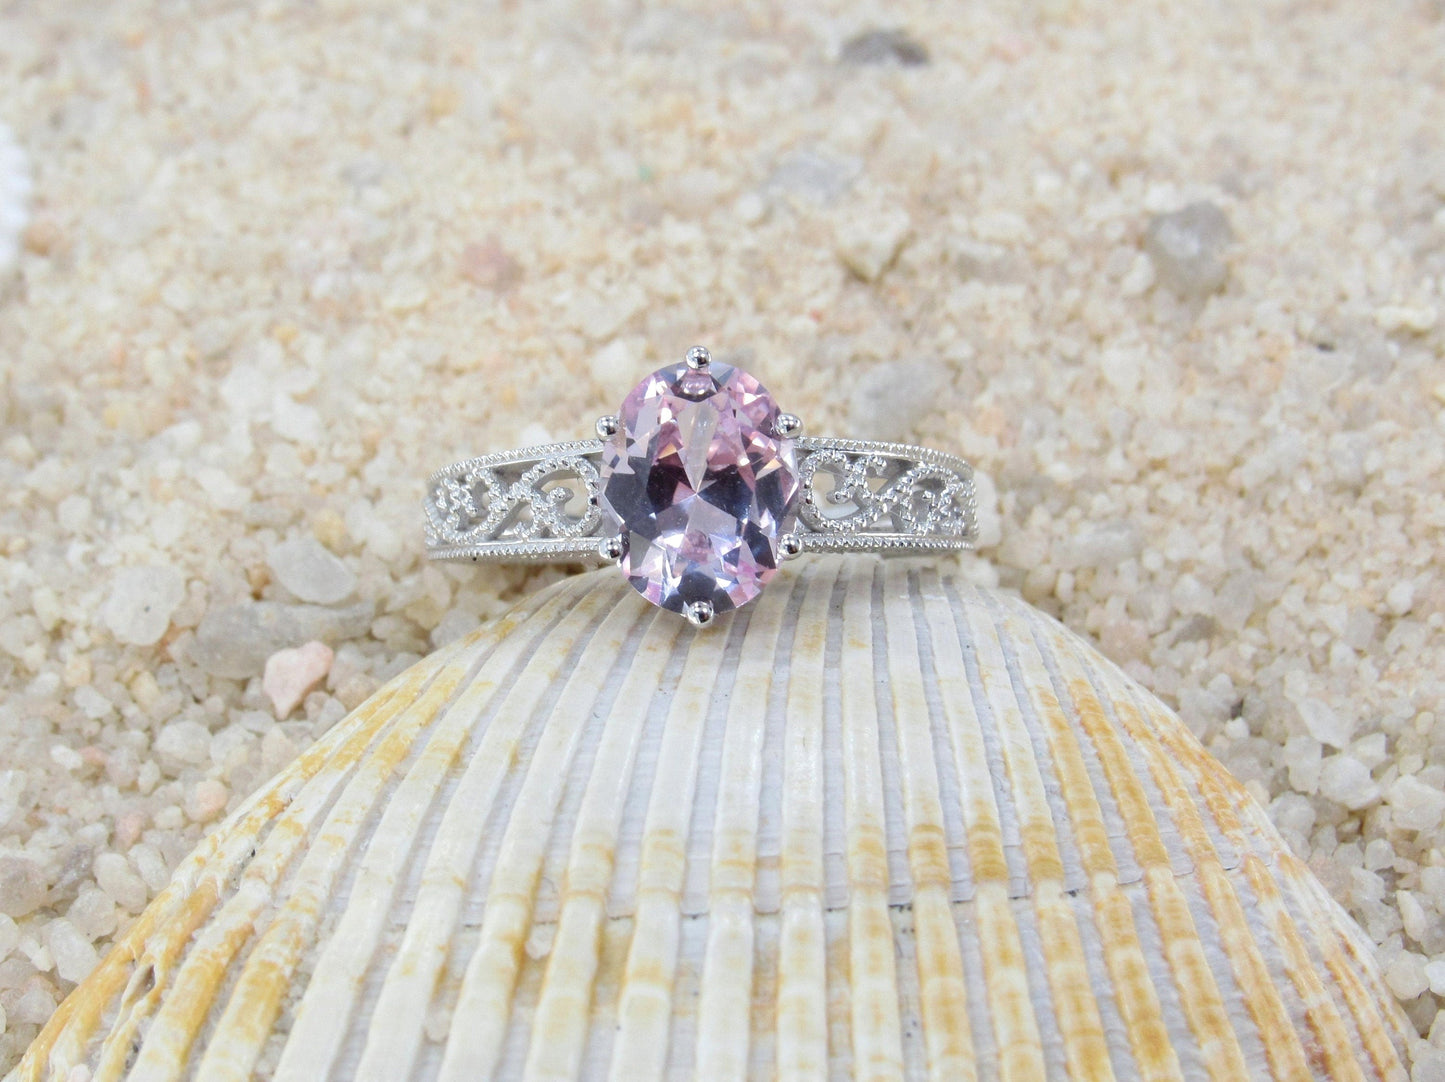 3ct Peach Sapphire Oval Engagement Ring, Vintage Ring, Antique Ring, Filigree Ring, Polymnia, 9x7mm, Promise Ring, Bridal Gold Ring BellaMoreDesign.com